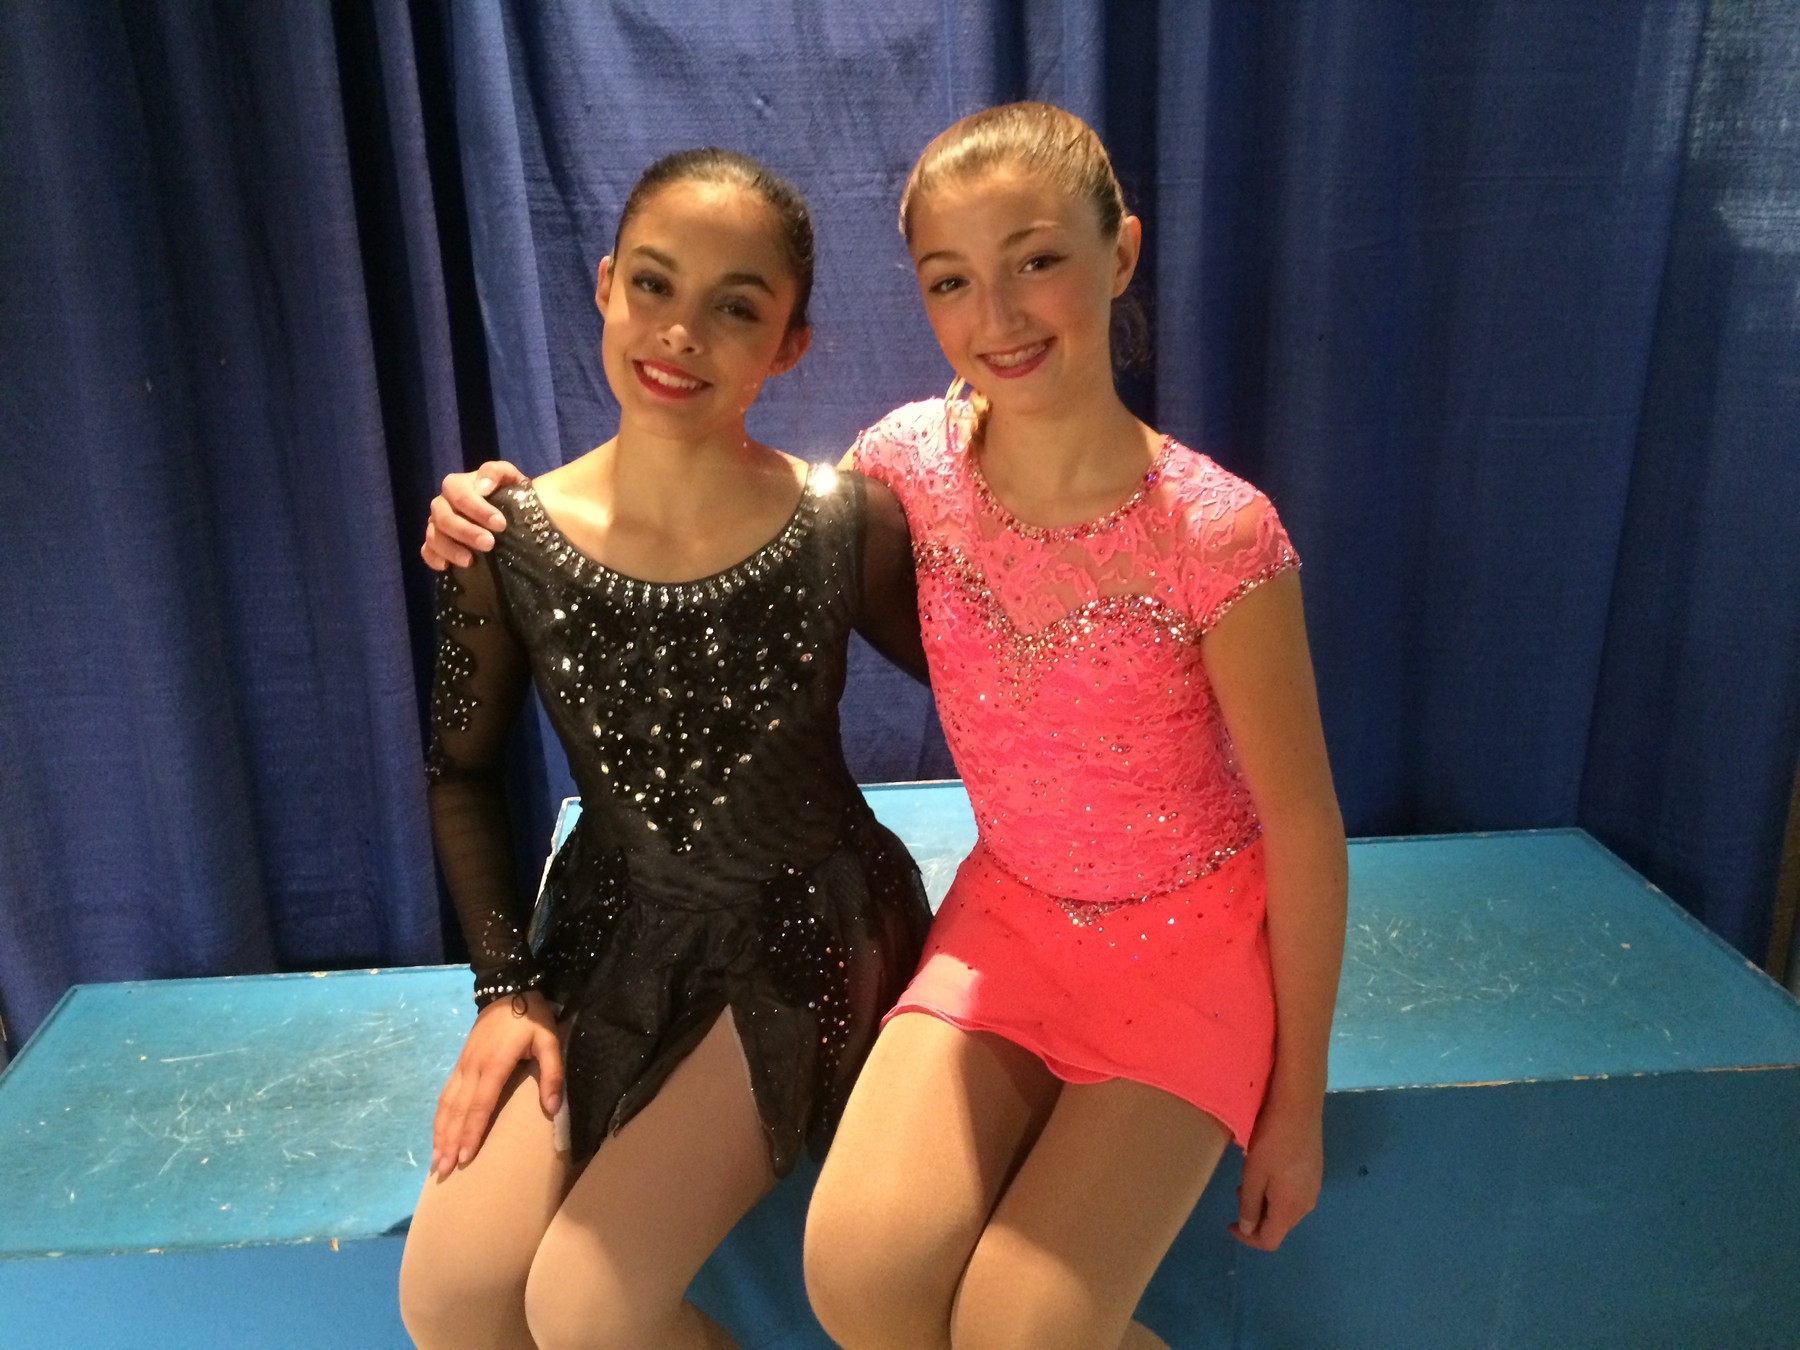 Madeline Schizas and Natalie Walker have been identified as part of Skate Canada’s ‘Next Gen’ | Skate Canada